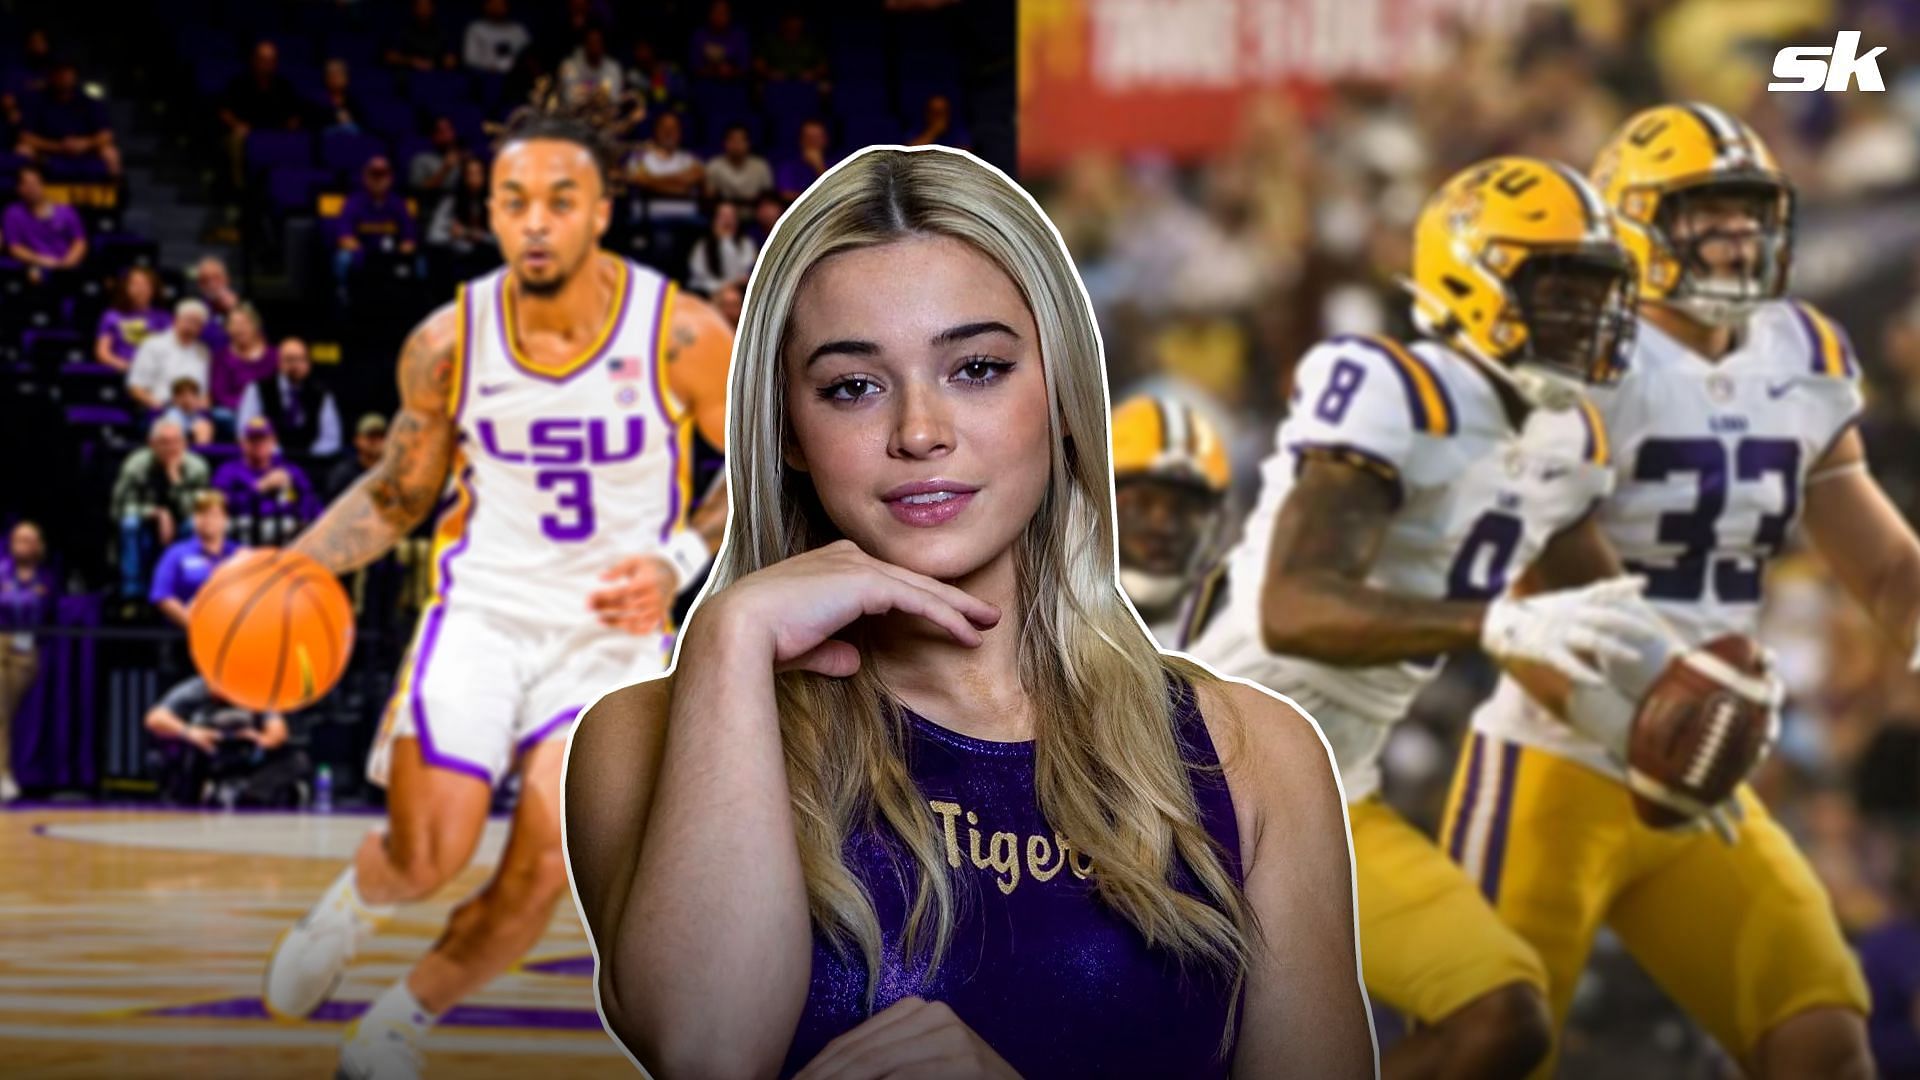 In a recent TikTok upload, Olivia Dunne wondered if her mlale NCAA counterparts had the same difficulty that she did in their pursuit of success